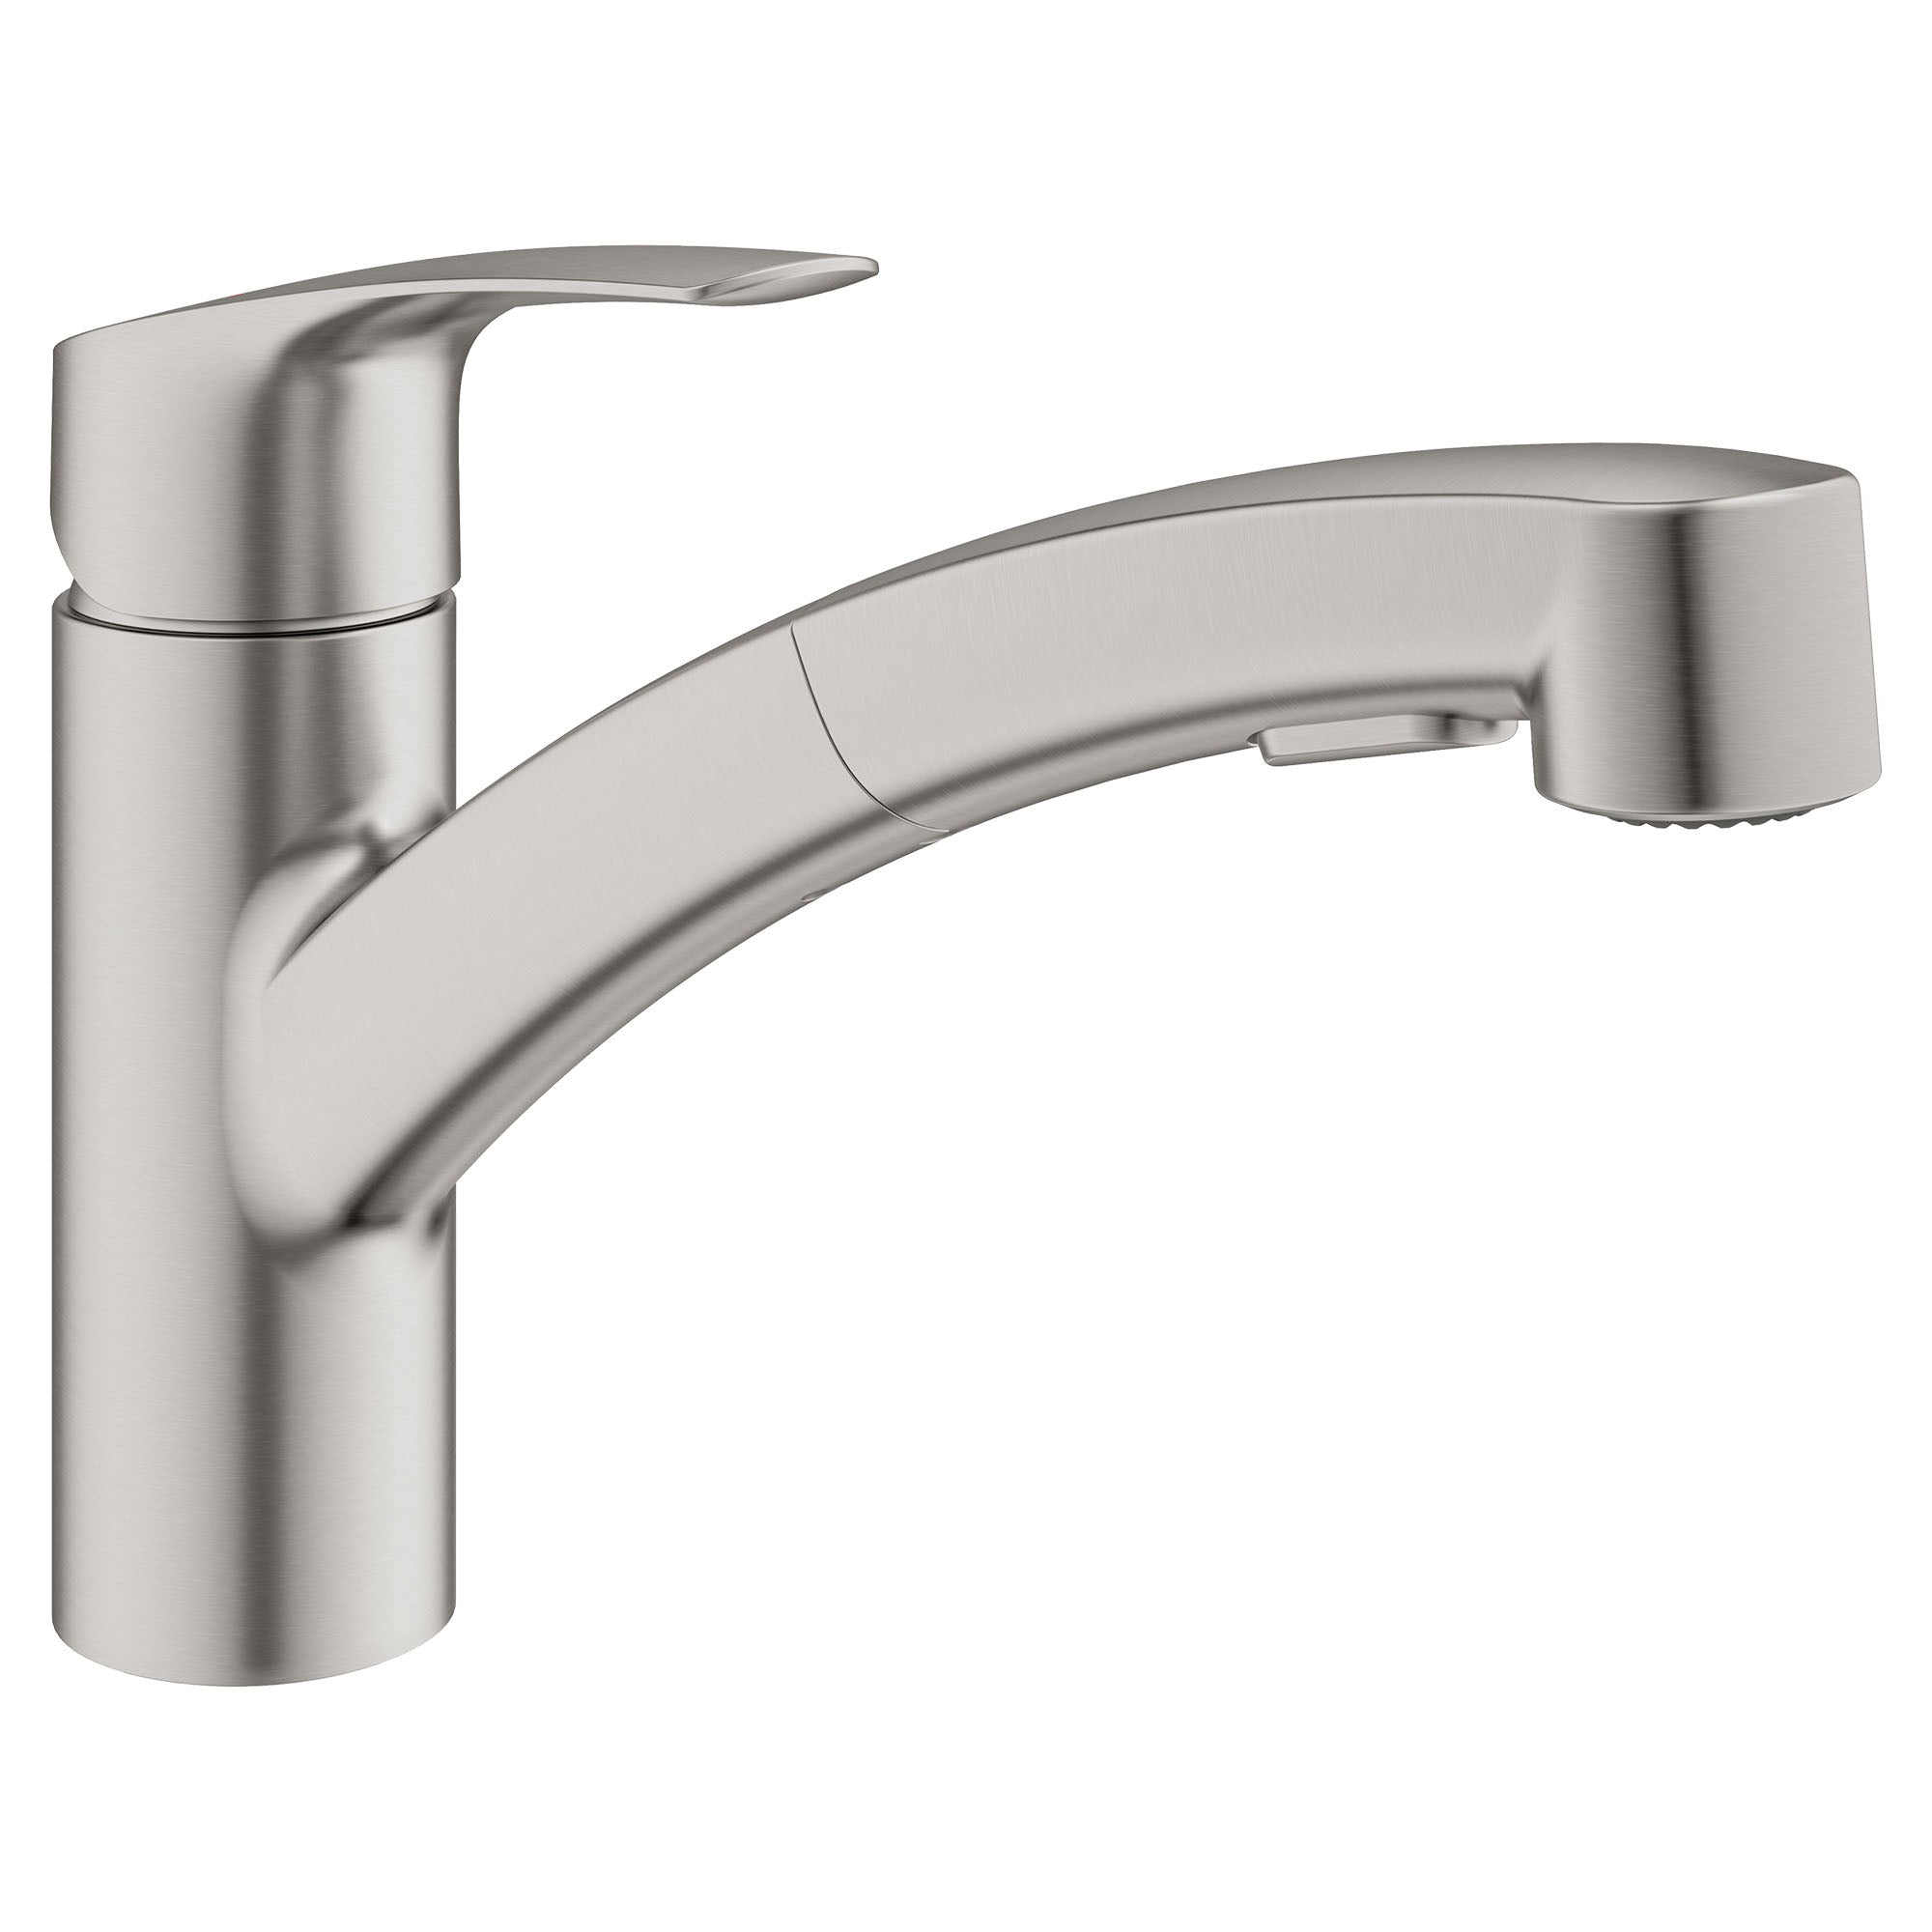 Grohe Eurosmart Single-Handle Dual Spray Pull-Out Kitchen Faucet